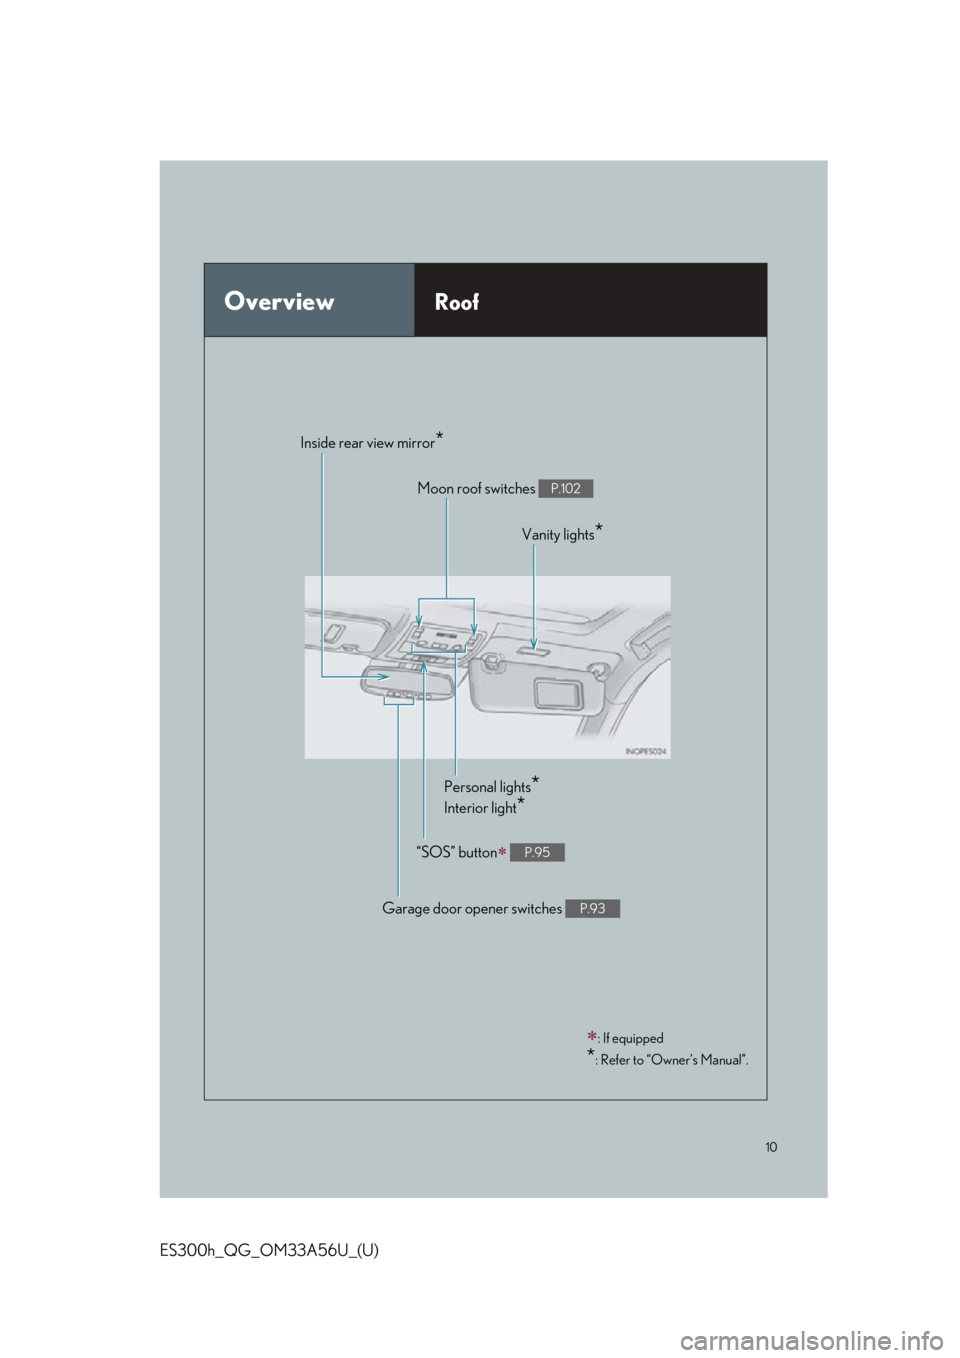 Lexus ES300h 2013  Maintenance and care / Owners Manual Quick Guide (OM33A56U) 10
ES300h_QG_OM33A56U_(U)
OverviewRoof
: If equipped
*: Refer to “Owner’s Manual”.
Moon roof switches P.102
Personal lights*
Interior light*
“SOS” button P.95
Garage door opener switch